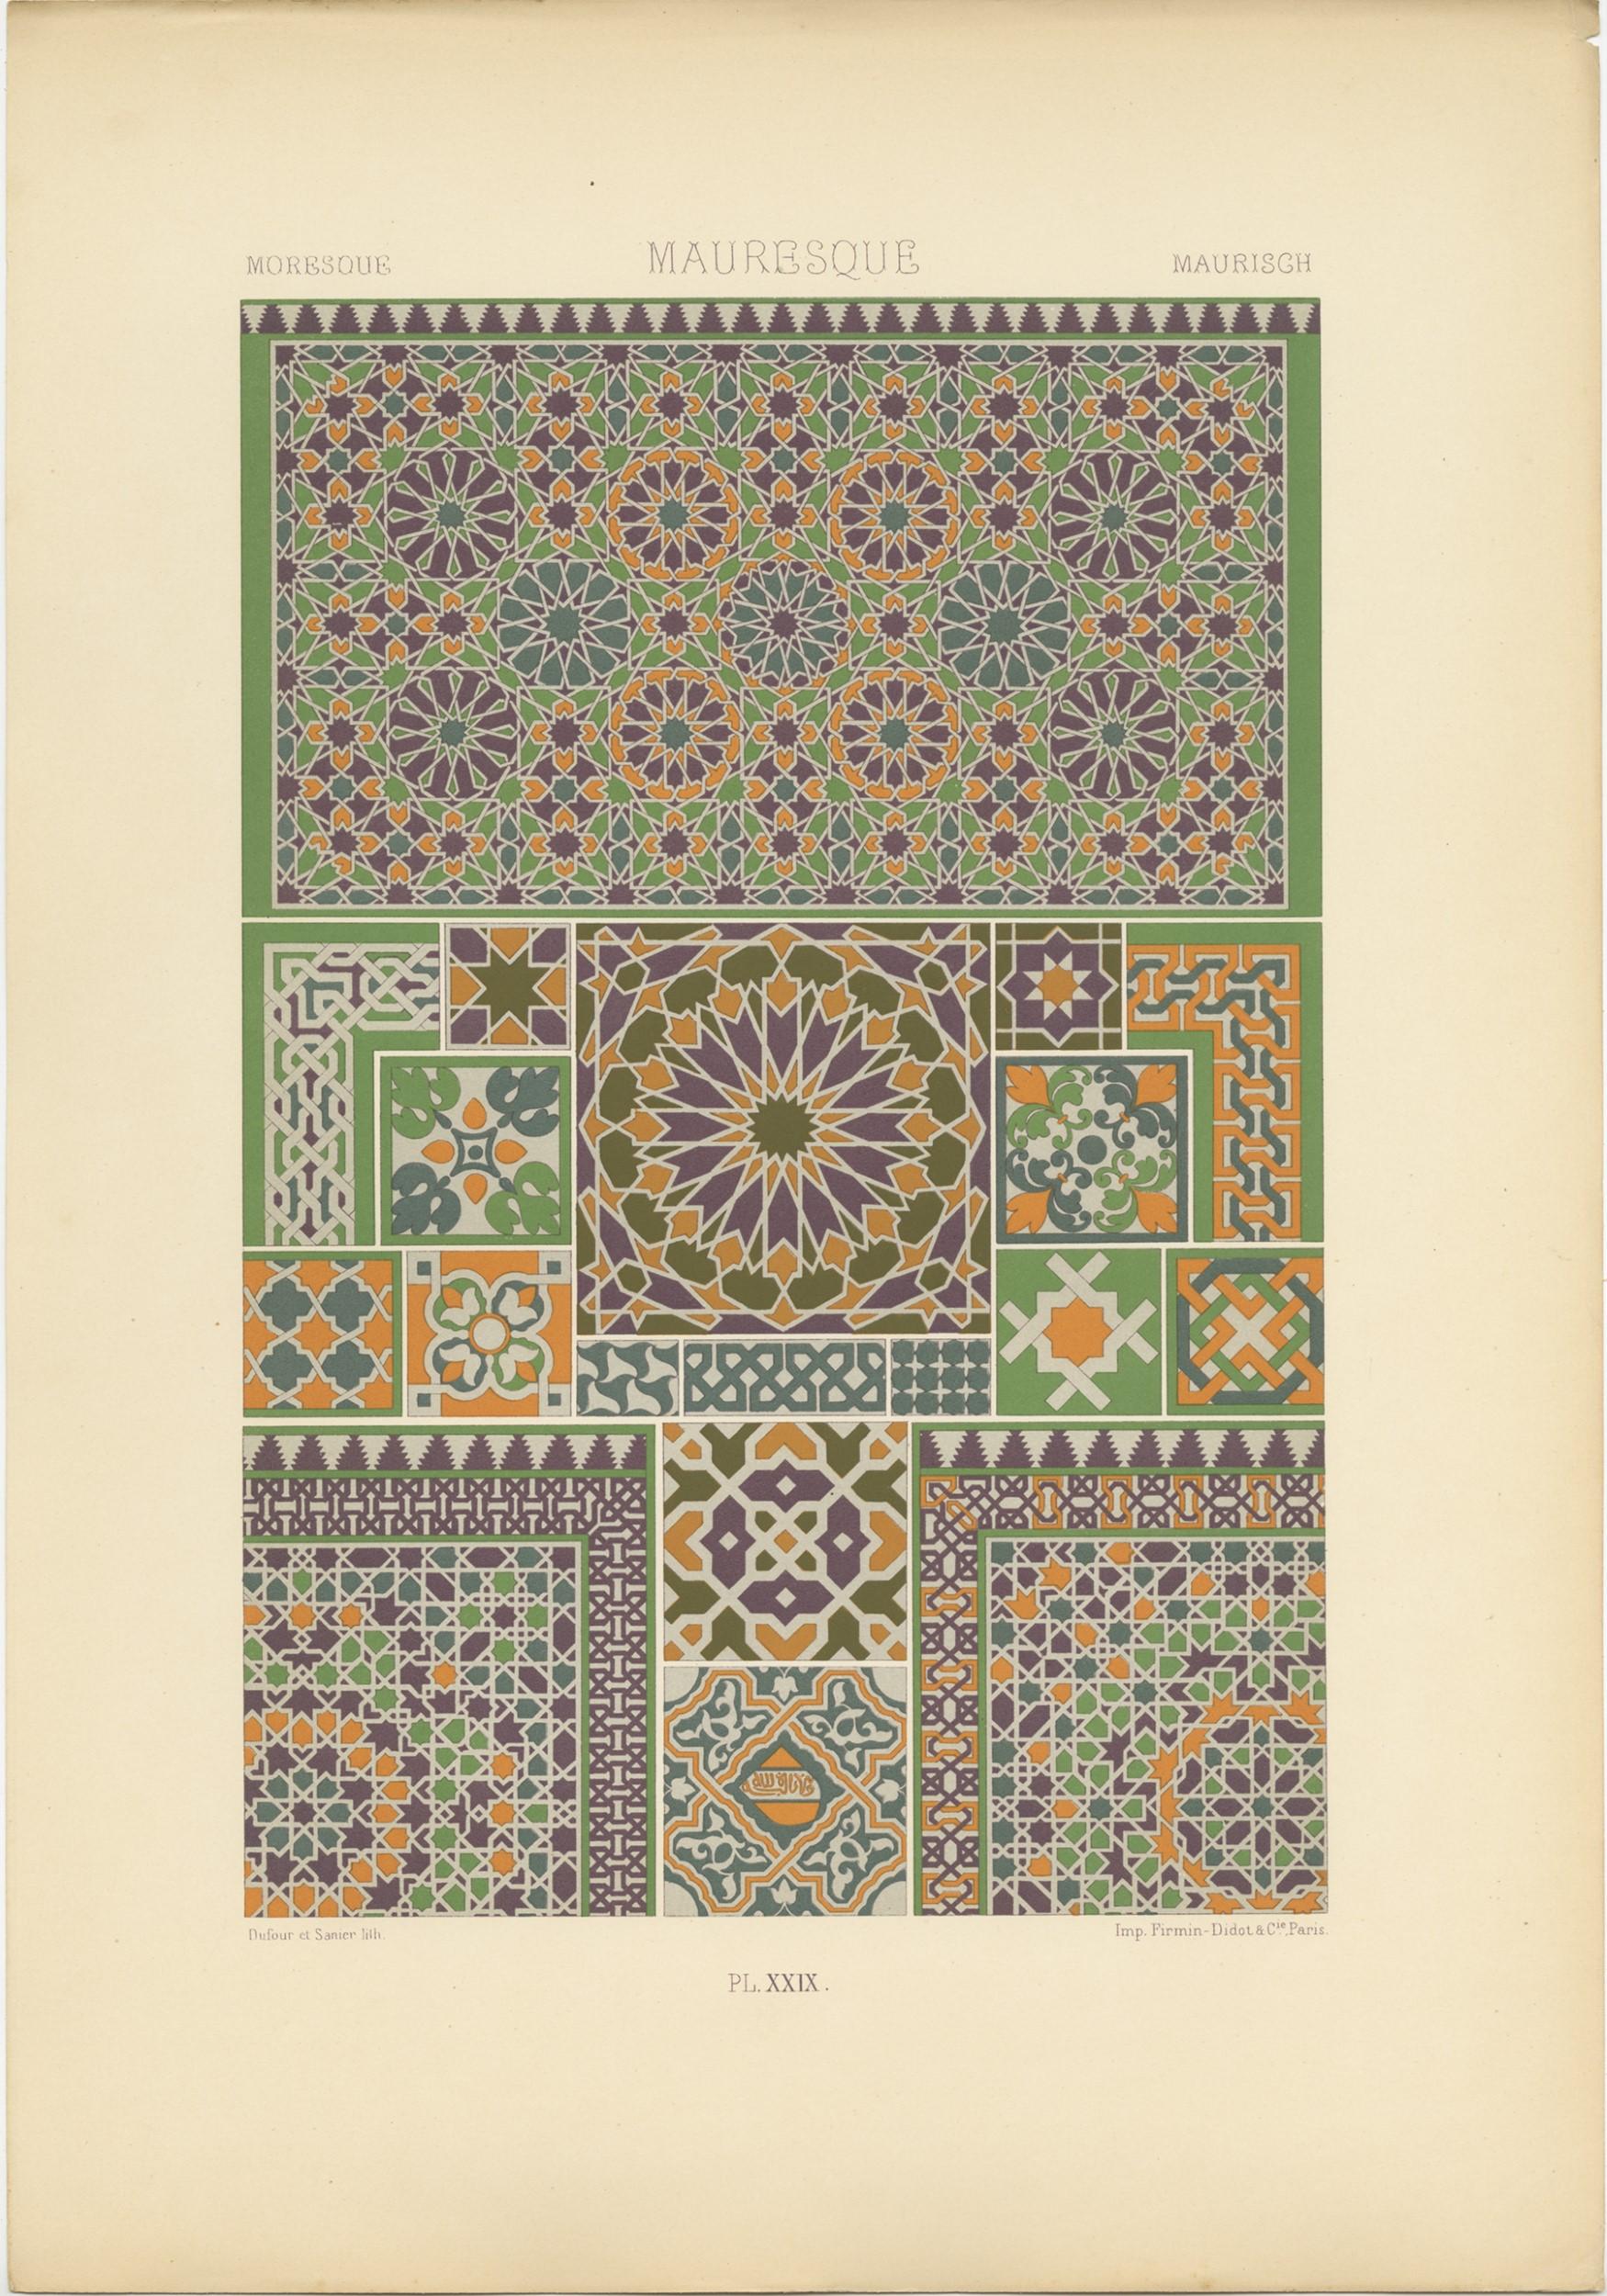 Antique print titled 'Moresque - Mauresque - Maurisch'. Chromolithograph of Moresque ornaments and decorative arts. This print originates from 'l'Ornement Polychrome' by Auguste Racinet. Published circa 1890.